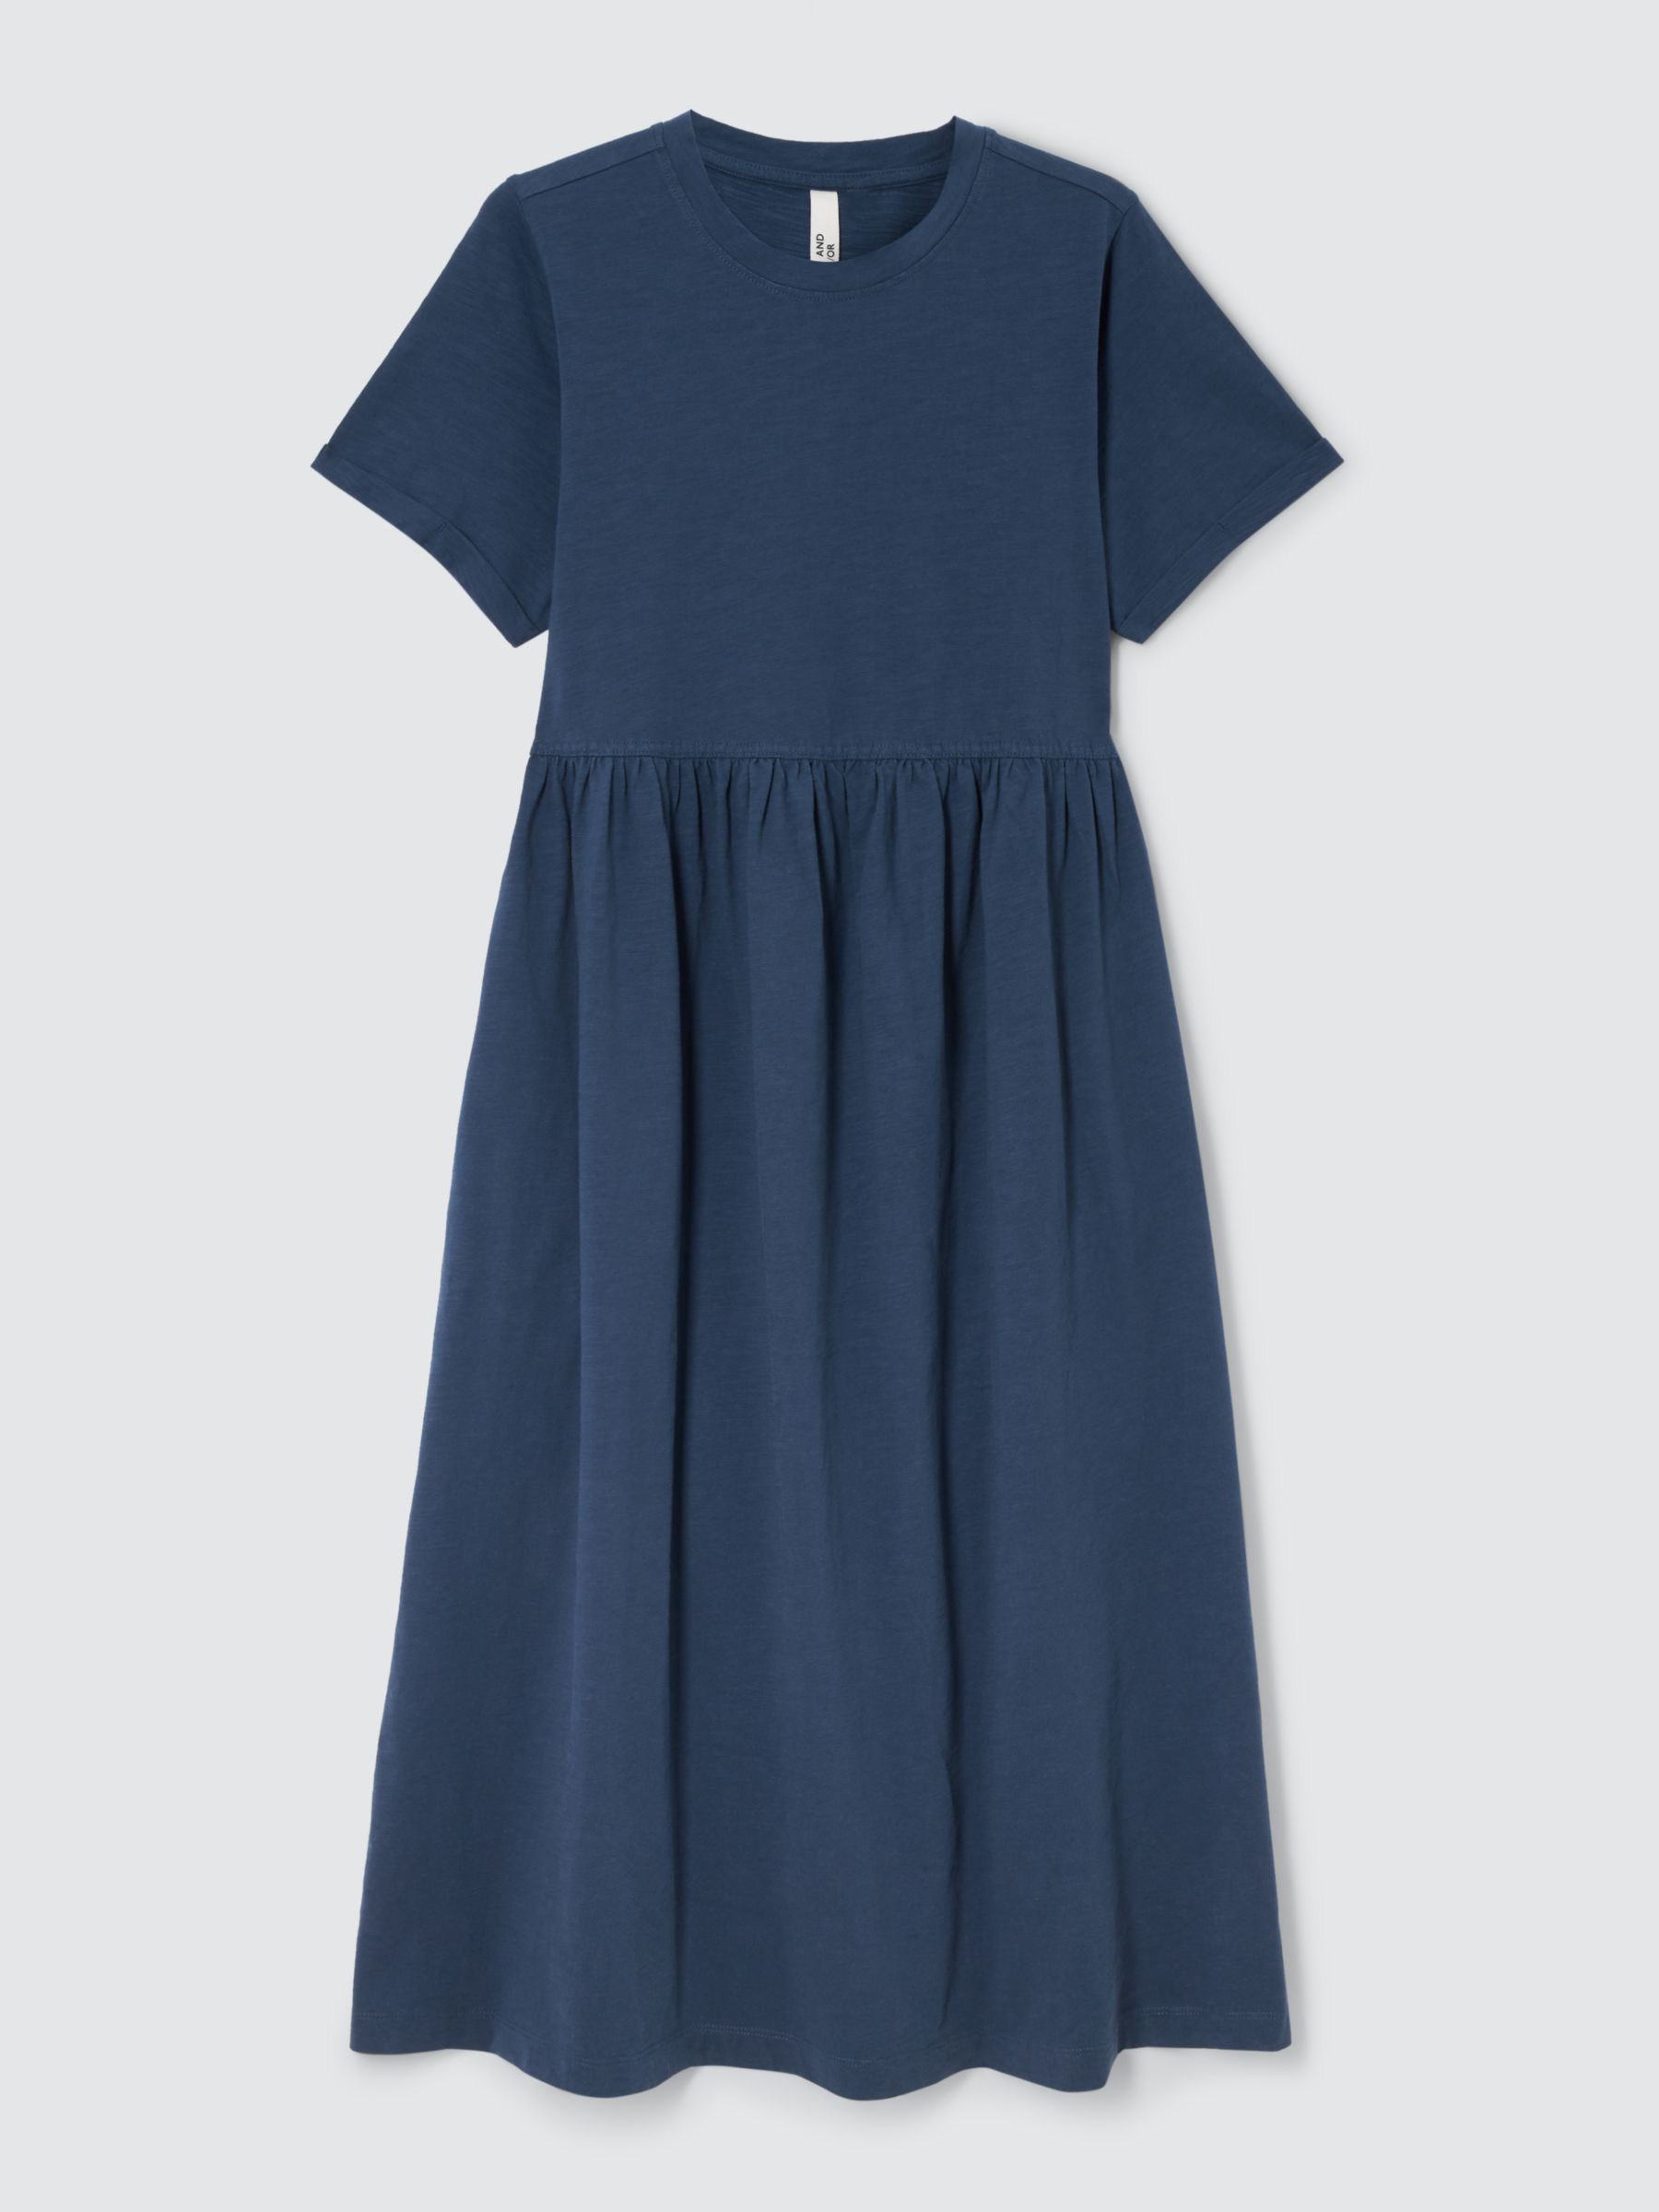 AND/OR Anna Jersey Smock Dress, Denim Blue, 6